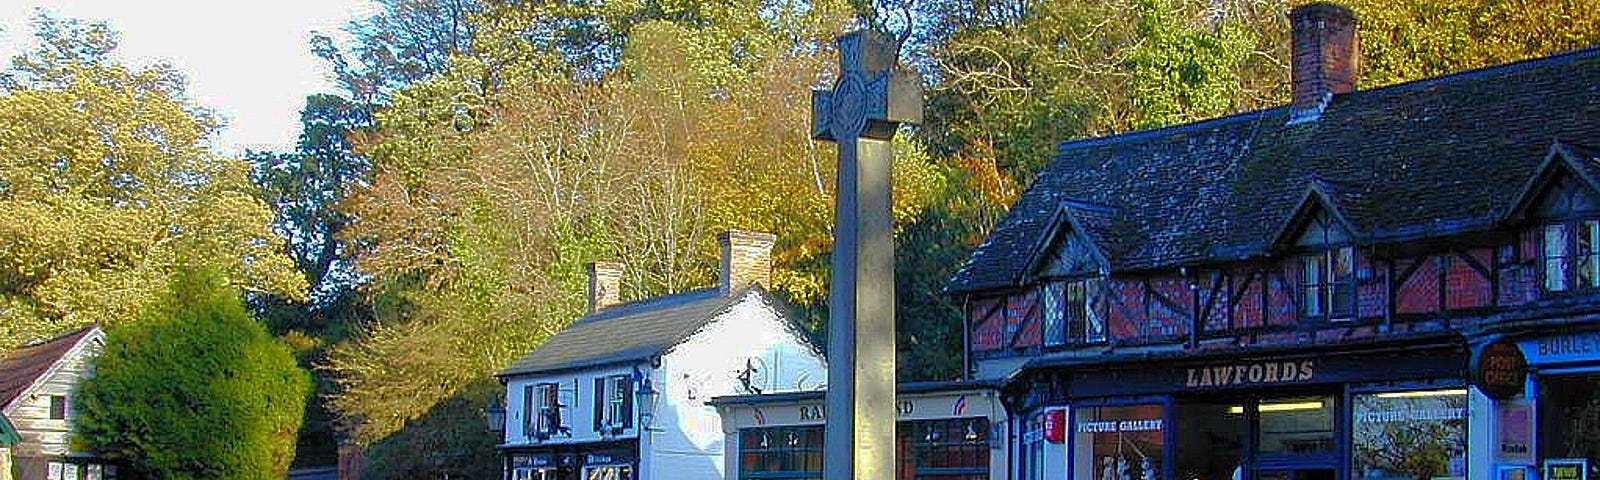 Burley Market Cross in England’s New Forest National Park that is filled with enough stories of ghosts, witches, smugglers, and Ronald Reagan’s astrologer to make every day seem like Halloween by David A. Laws